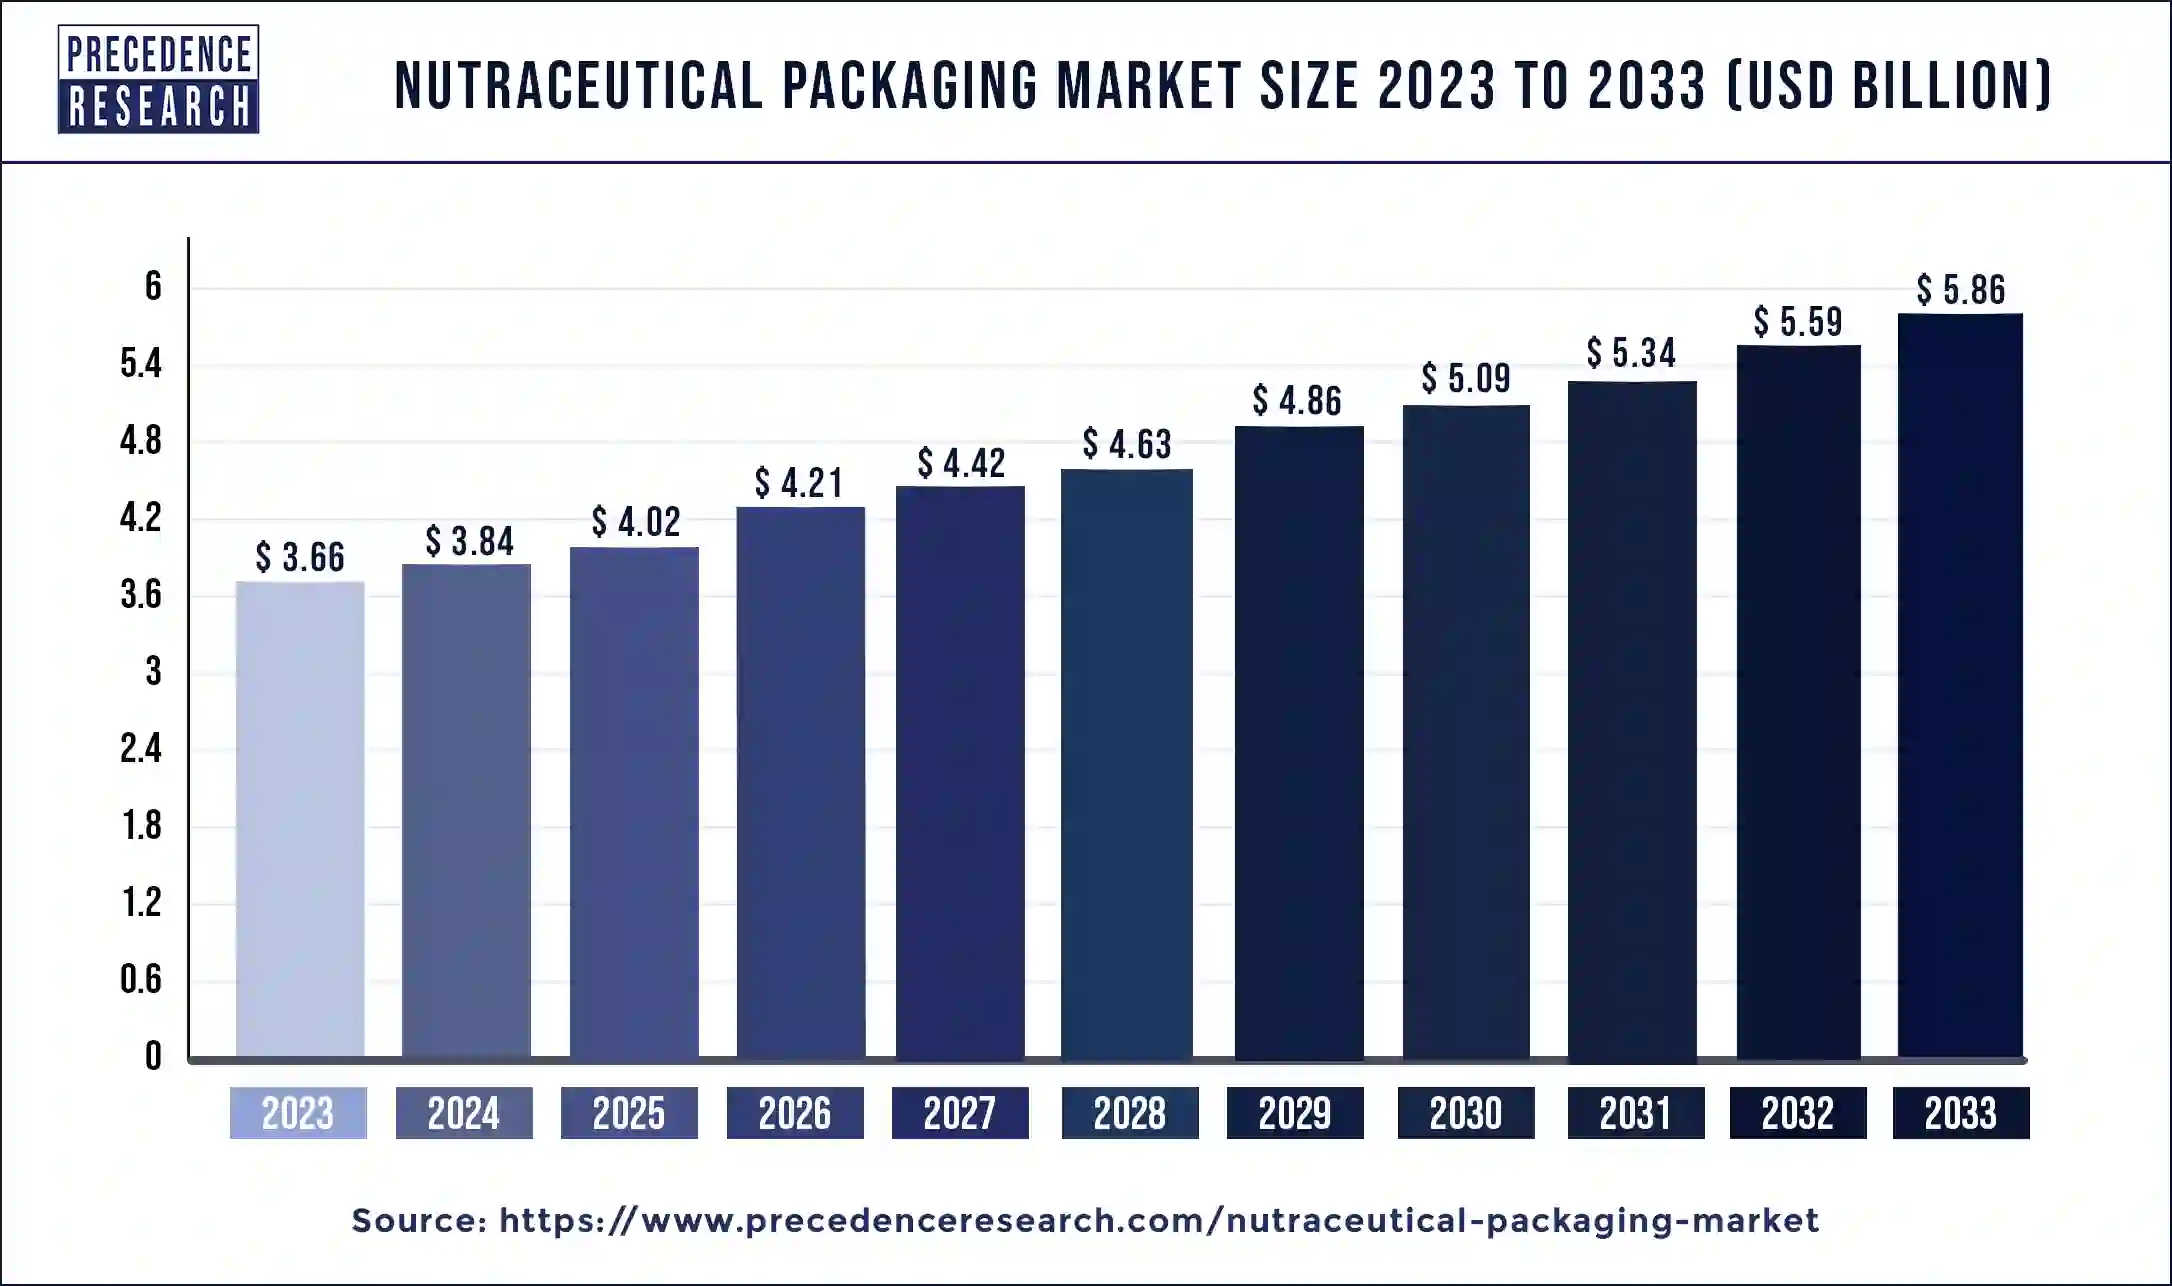 Nutraceutical Packaging Market Size 2024 to 2033